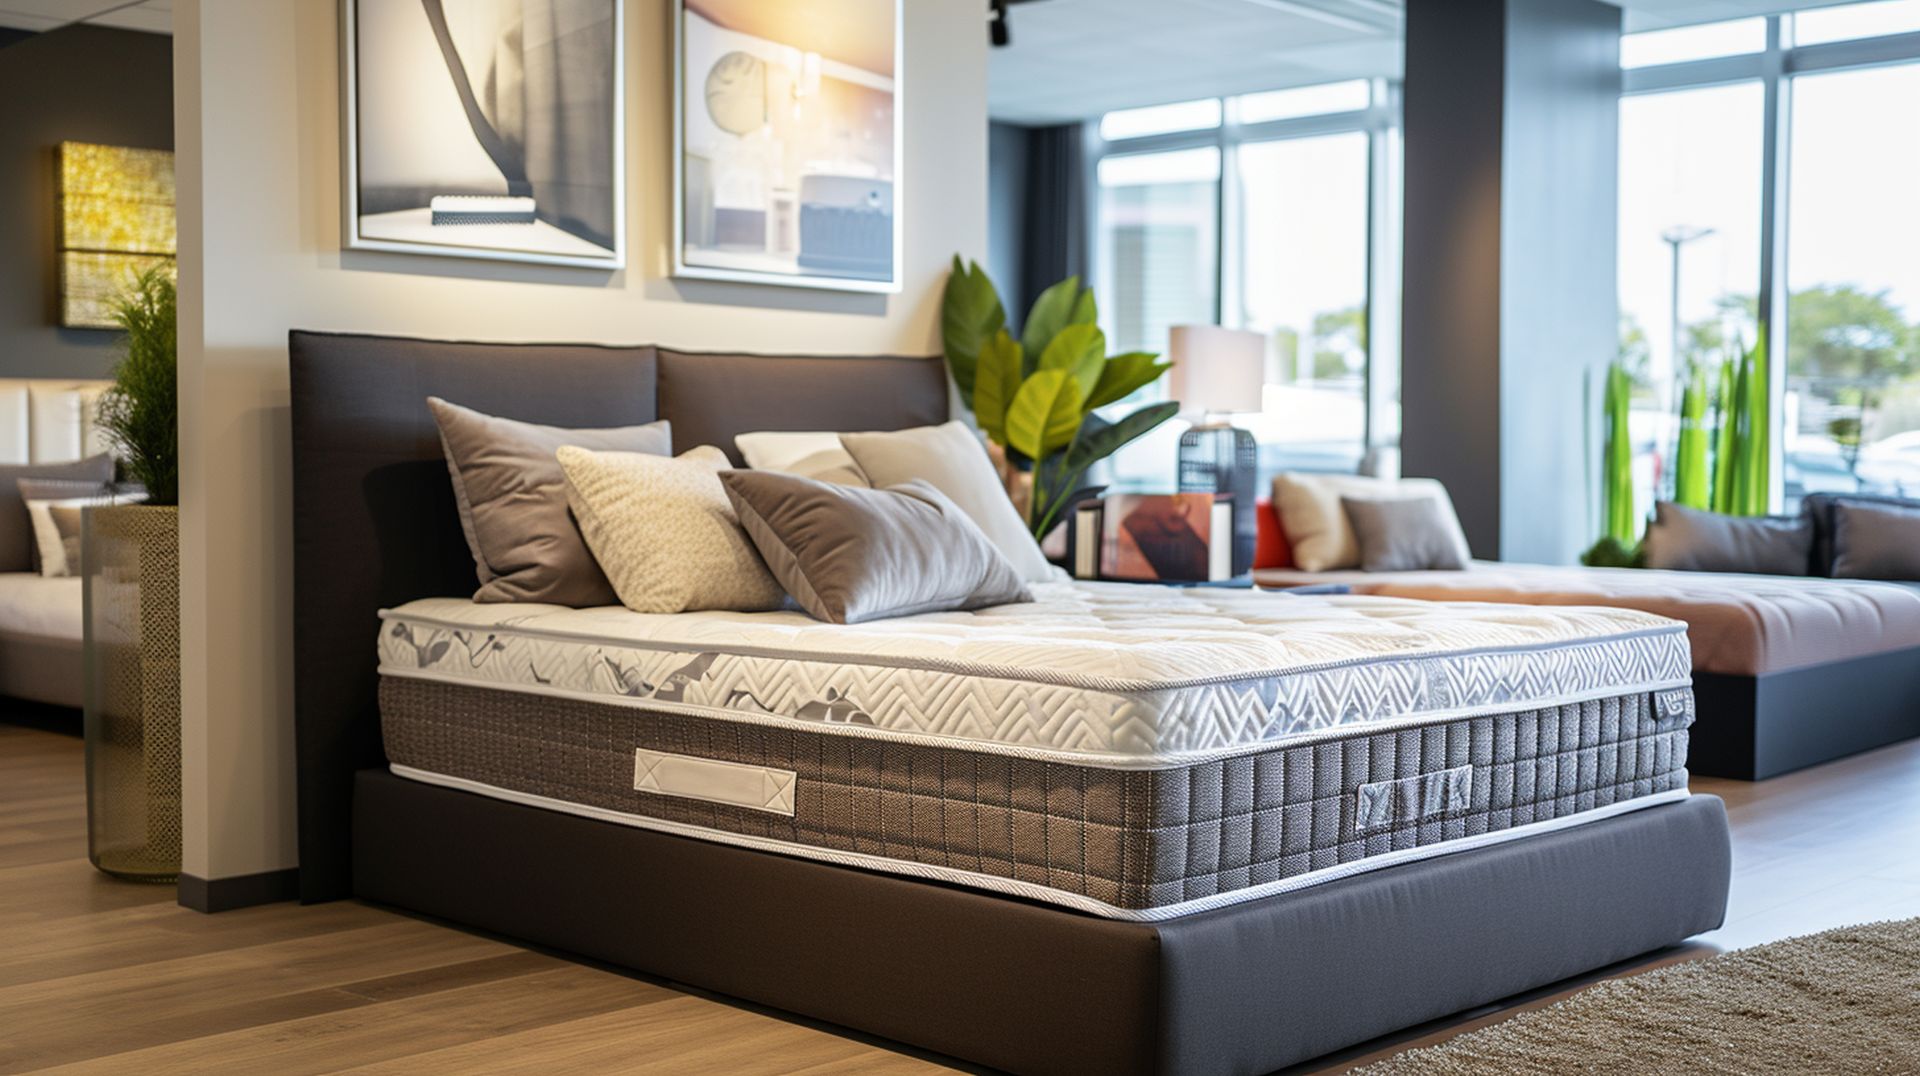 Types of mattresses at mattress dealers in Bethlehem, PA